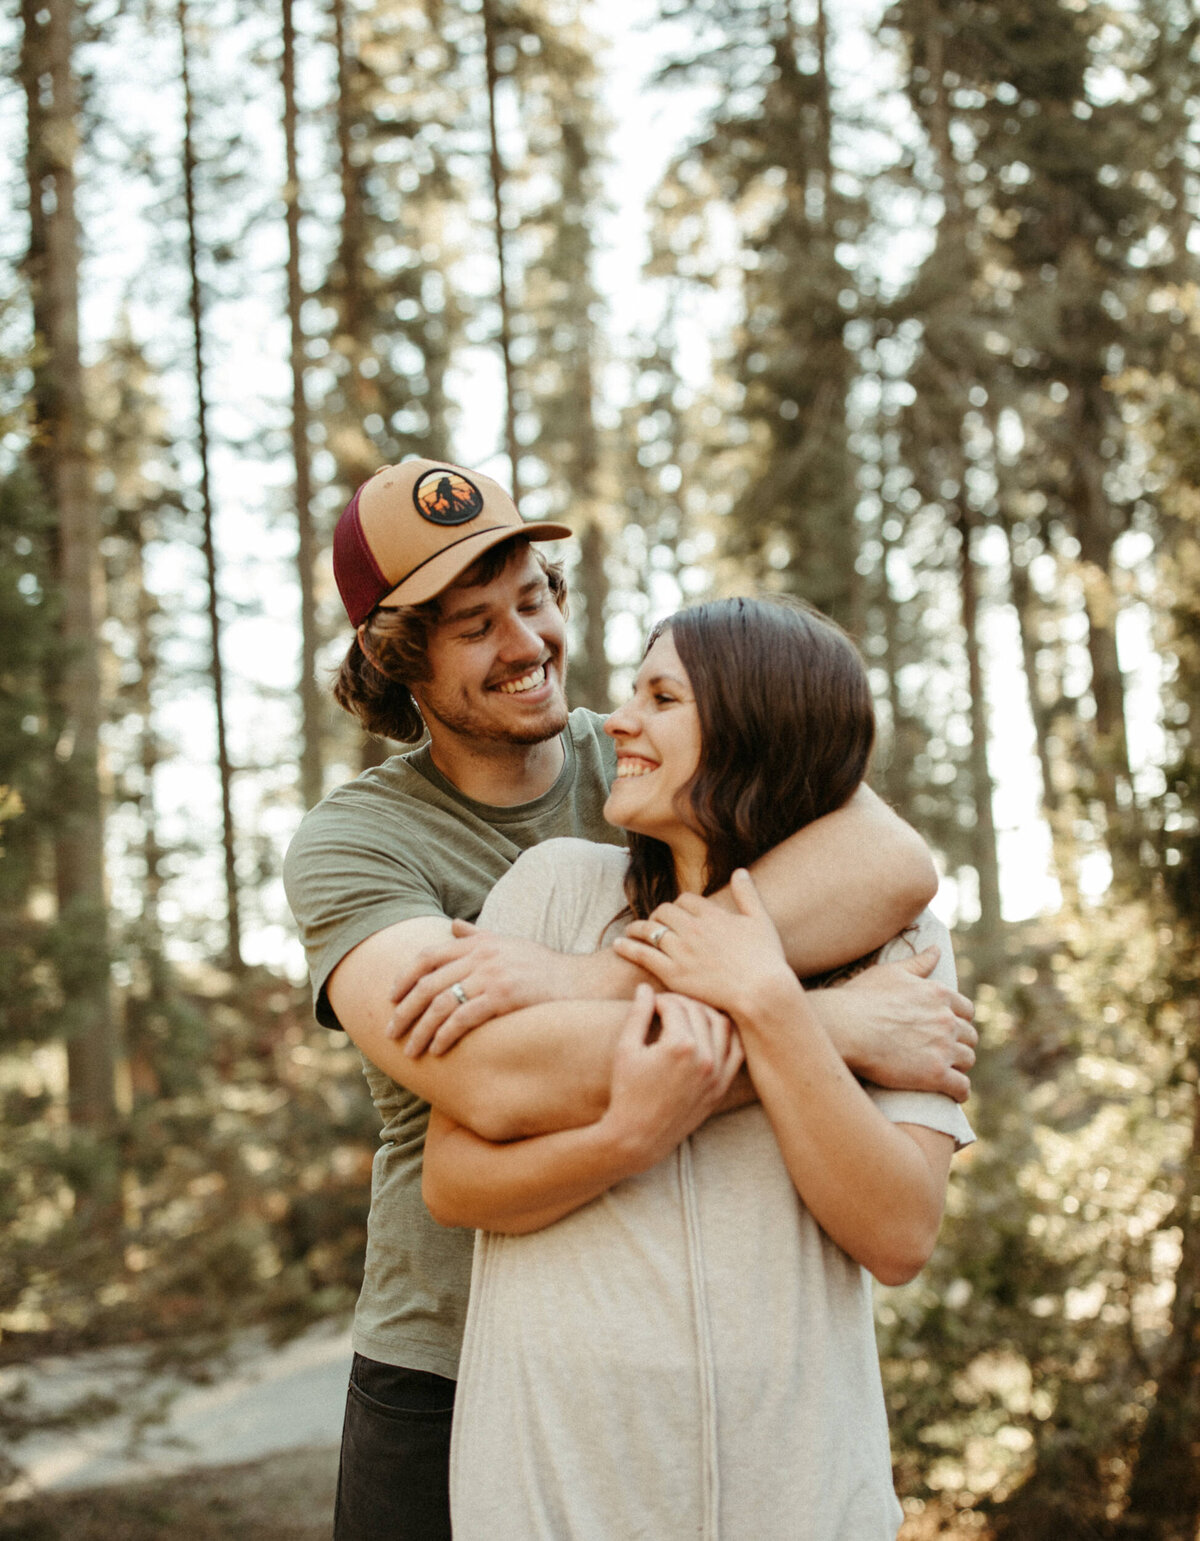 Guy in hat wrapping his arms around a girl in the woods with tall trees behind them